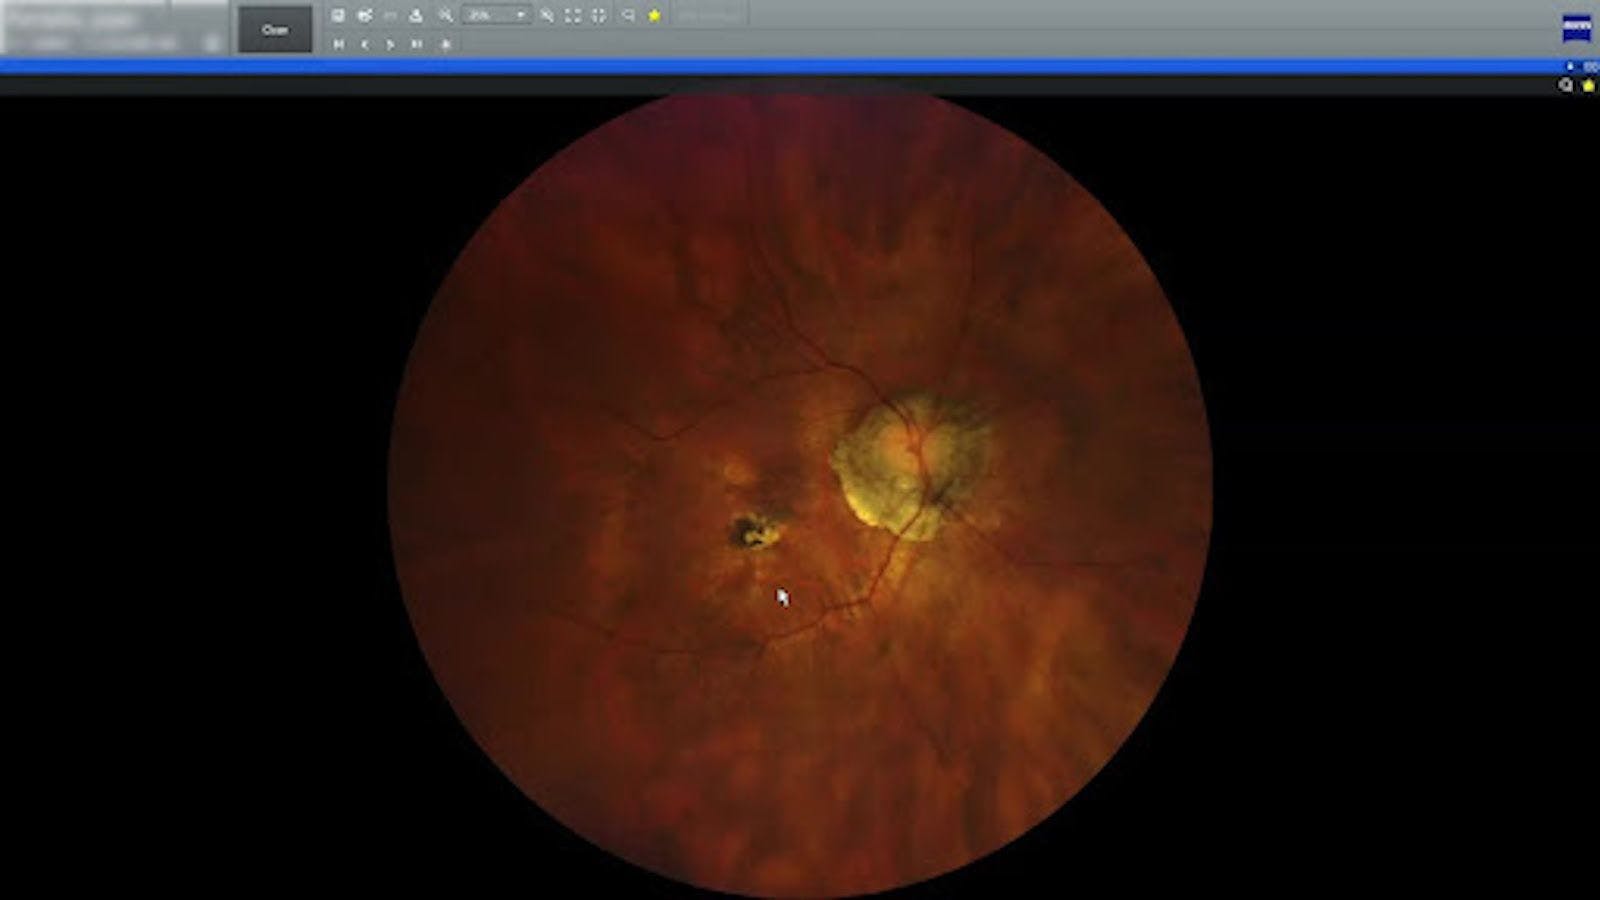 OCTA can provide insight into thinning and other retinal issues